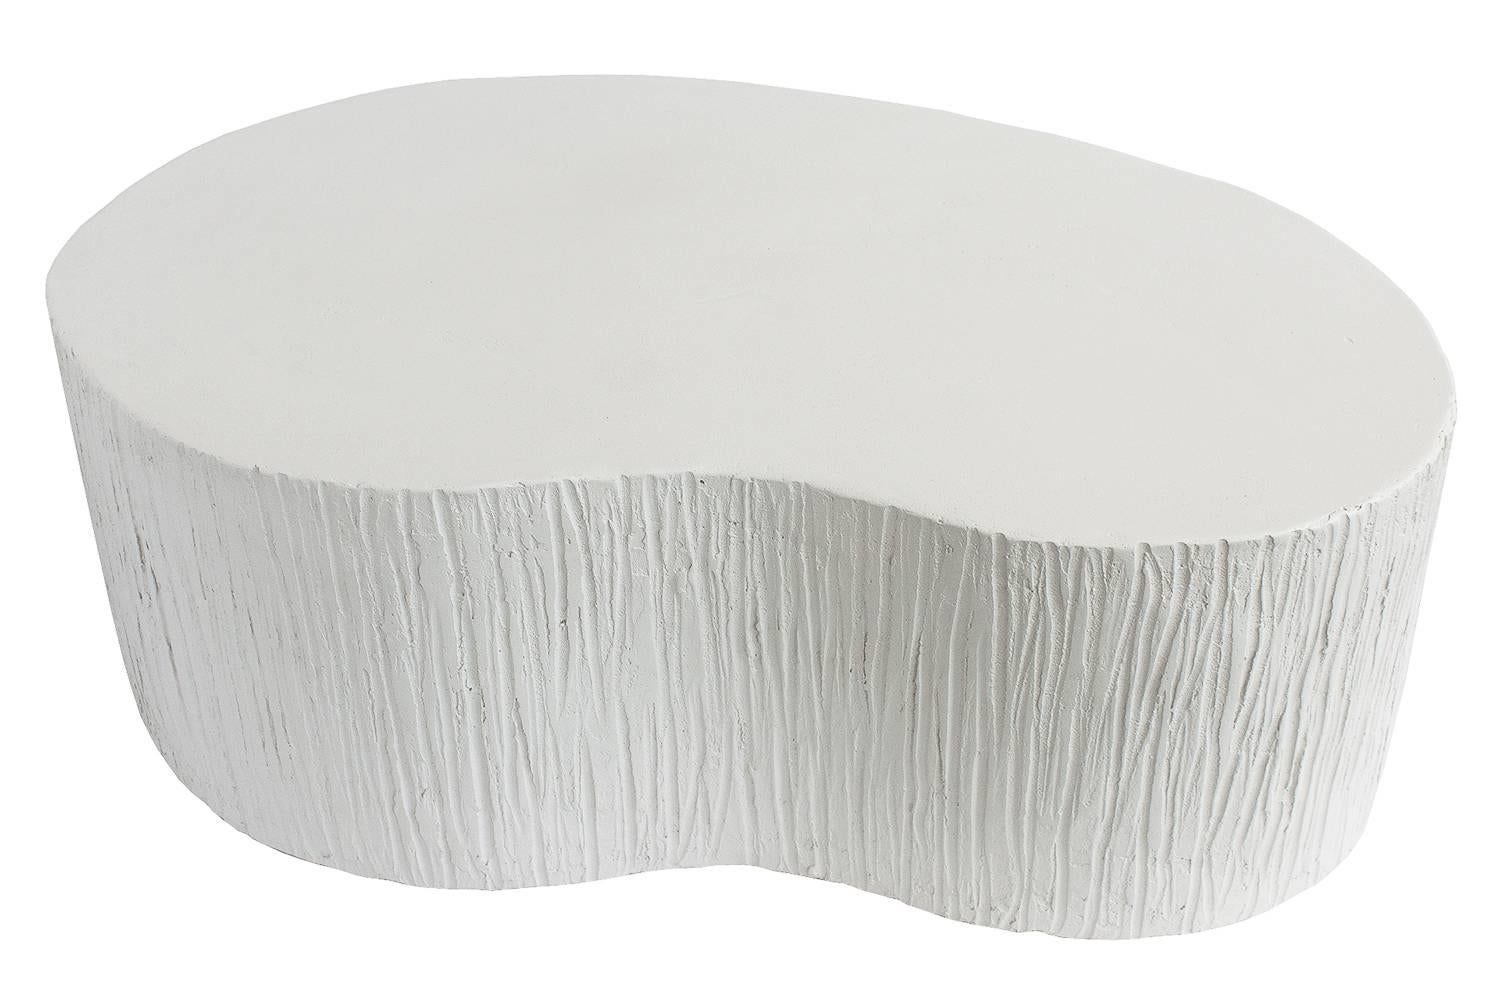 Faux plaster kidney shaped coffee table with raked textured sides. Handcrafted white (slight off white) faux plaster resin covered wooden form. Consider using as a coffee table or side table.